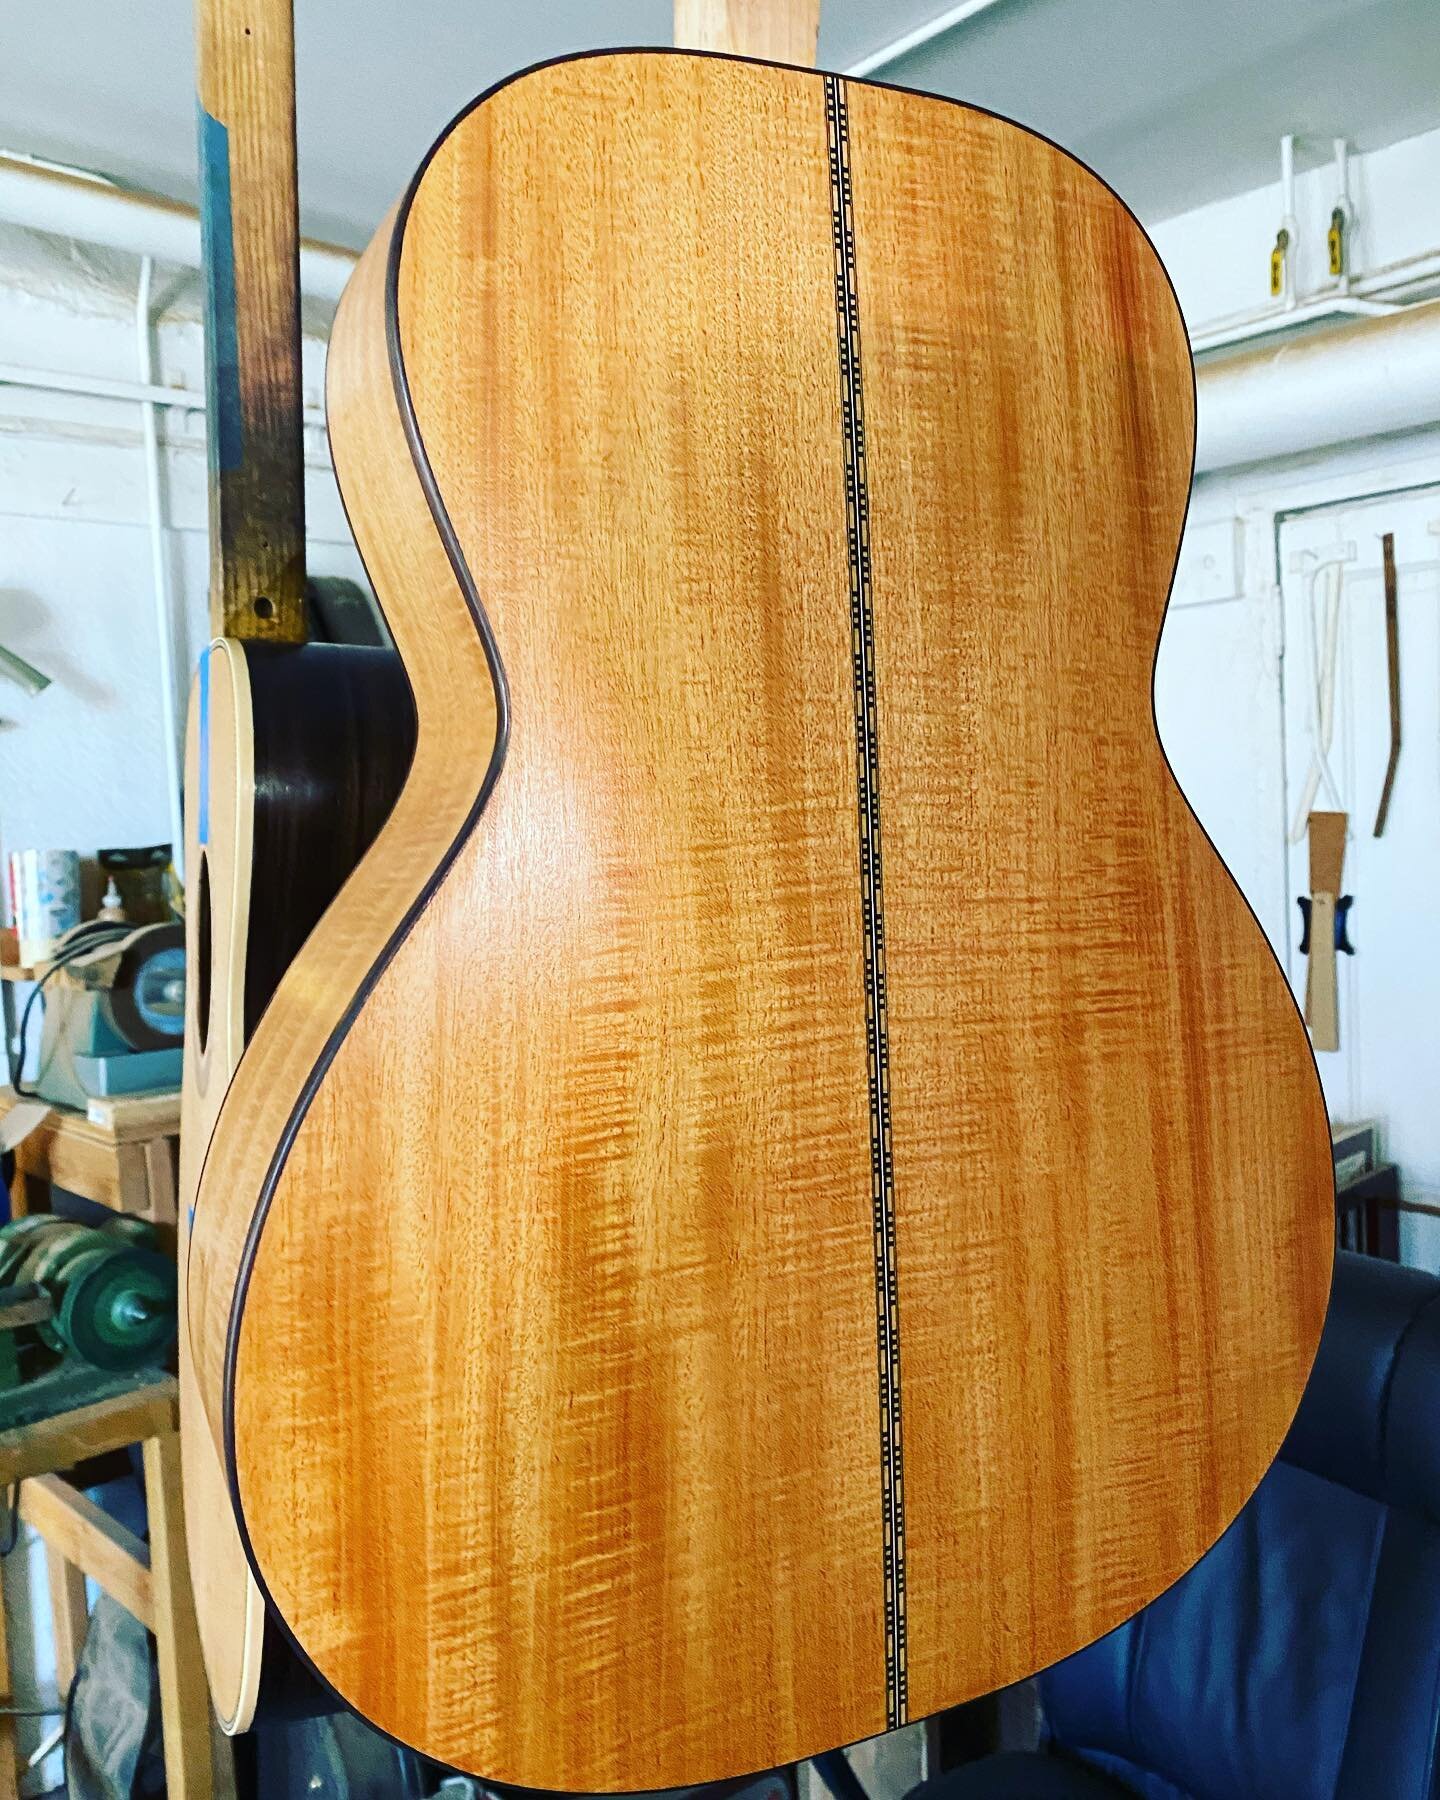 First look 👀 Cuban Mahogany &amp; Sitka spruce A4G 00-13.
&bull;
&bull;
&bull;
&bull;
#allfourguitars #allfour #a4g #luthier #lutherie #guitar #guitars #acousticguitar #guitarmaker #guitarbuilder #guitarsofinstagram #wood #woodworking #handcrafted #